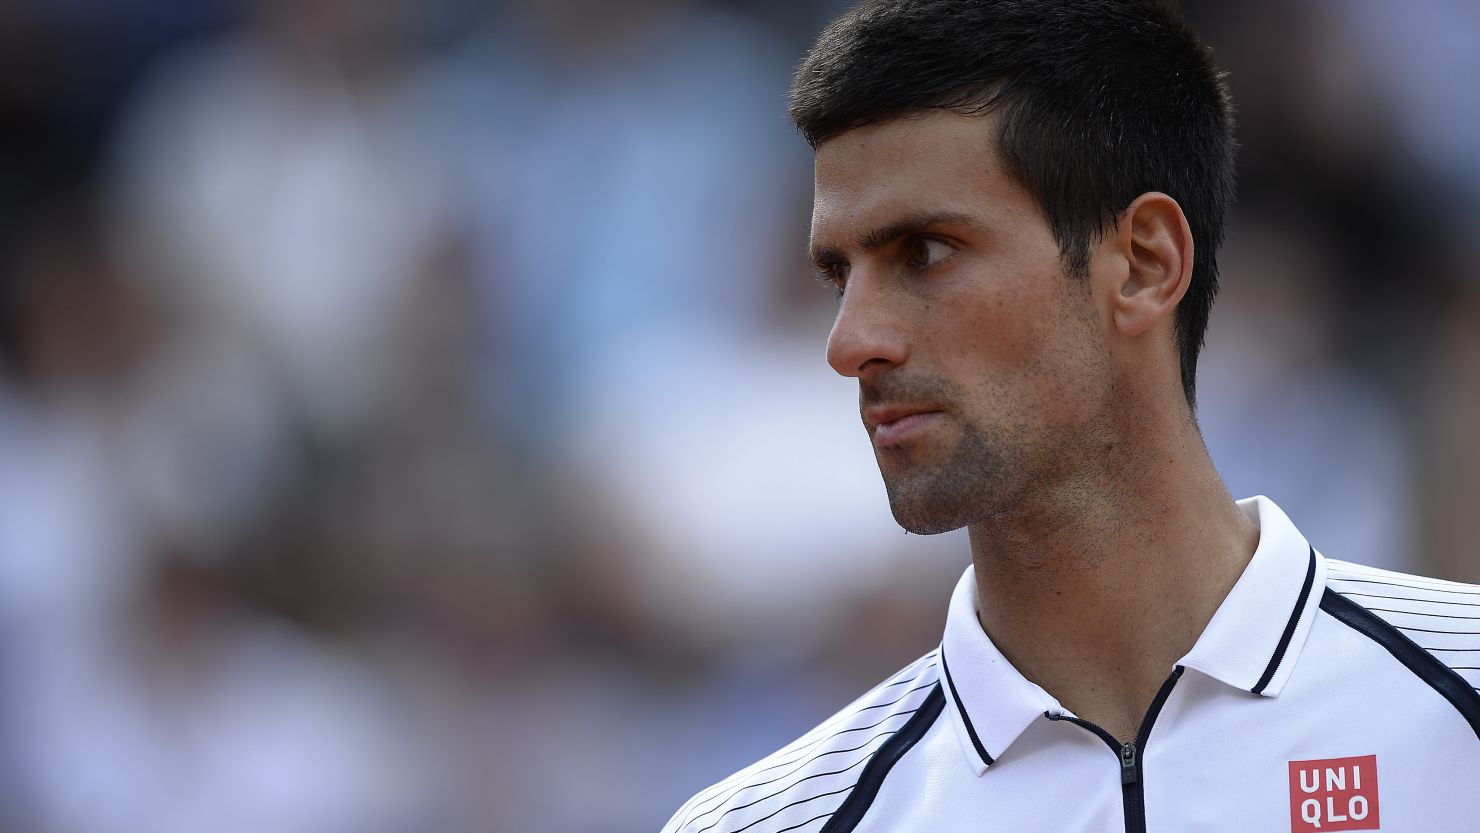 Novak Djokovic suffered his second early exit in as many clay court tournaments.